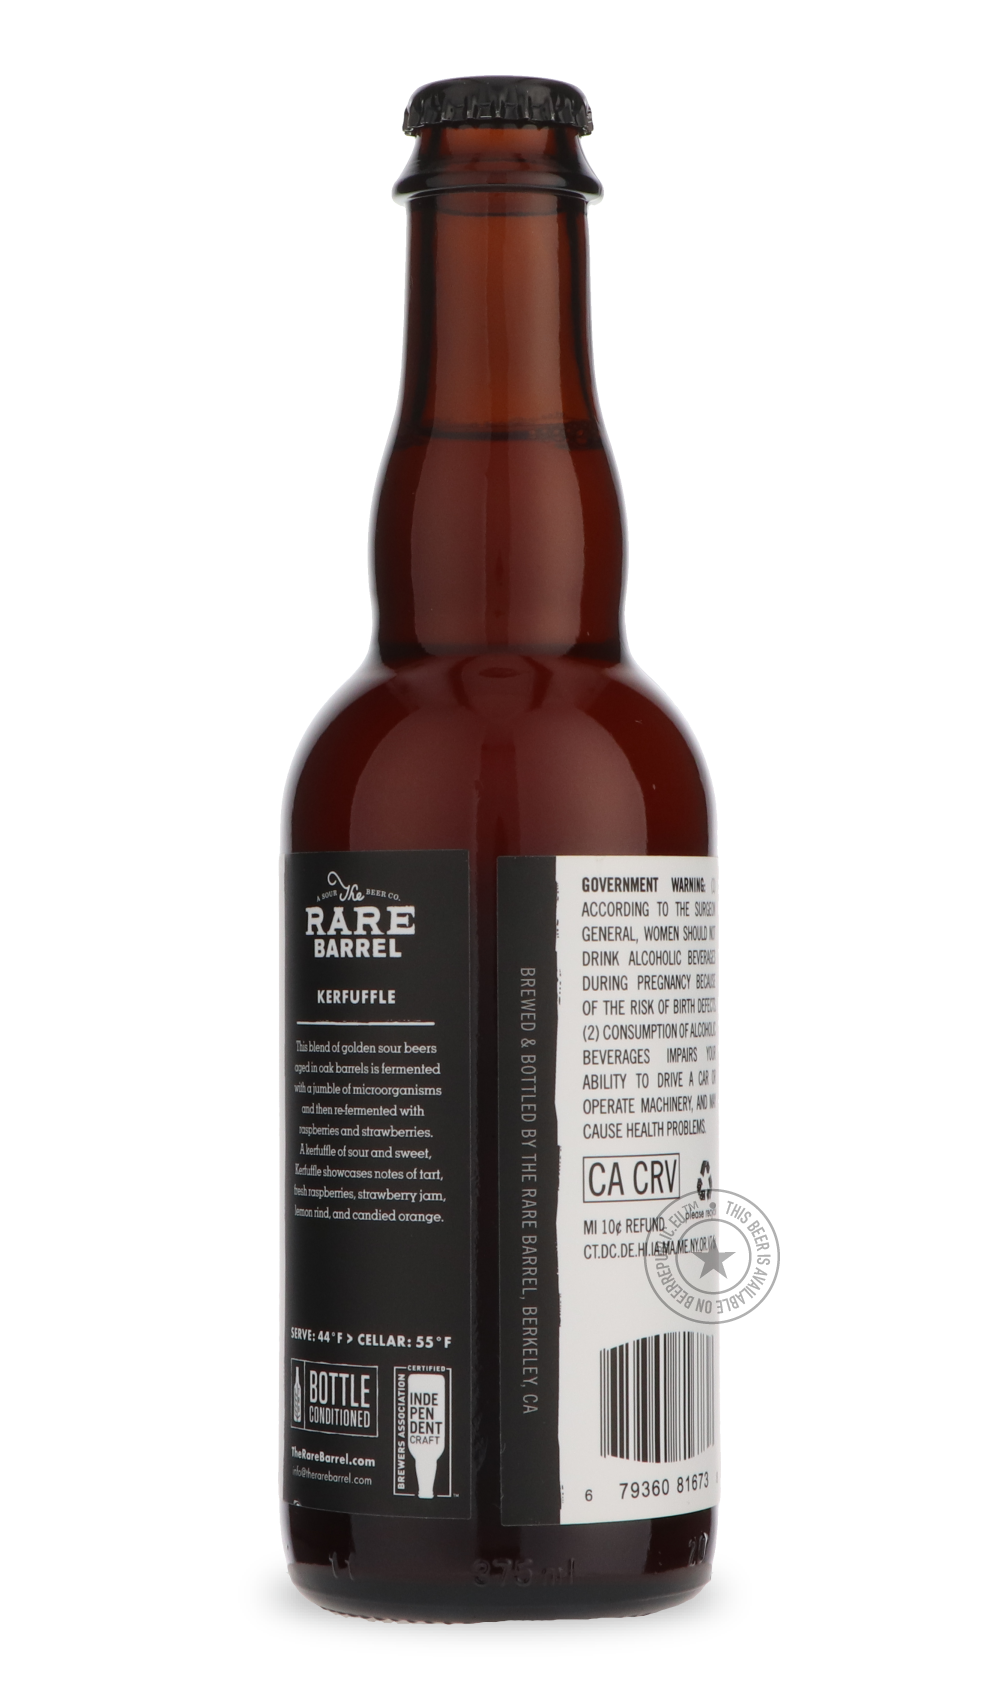 -The Rare Barrel- Kerfuffle 2021-Sour / Wild & Fruity- Only @ Beer Republic - The best online beer store for American & Canadian craft beer - Buy beer online from the USA and Canada - Bier online kopen - Amerikaans bier kopen - Craft beer store - Craft beer kopen - Amerikanisch bier kaufen - Bier online kaufen - Acheter biere online - IPA - Stout - Porter - New England IPA - Hazy IPA - Imperial Stout - Barrel Aged - Barrel Aged Imperial Stout - Brown - Dark beer - Blond - Blonde - Pilsner - Lager - Wheat - 